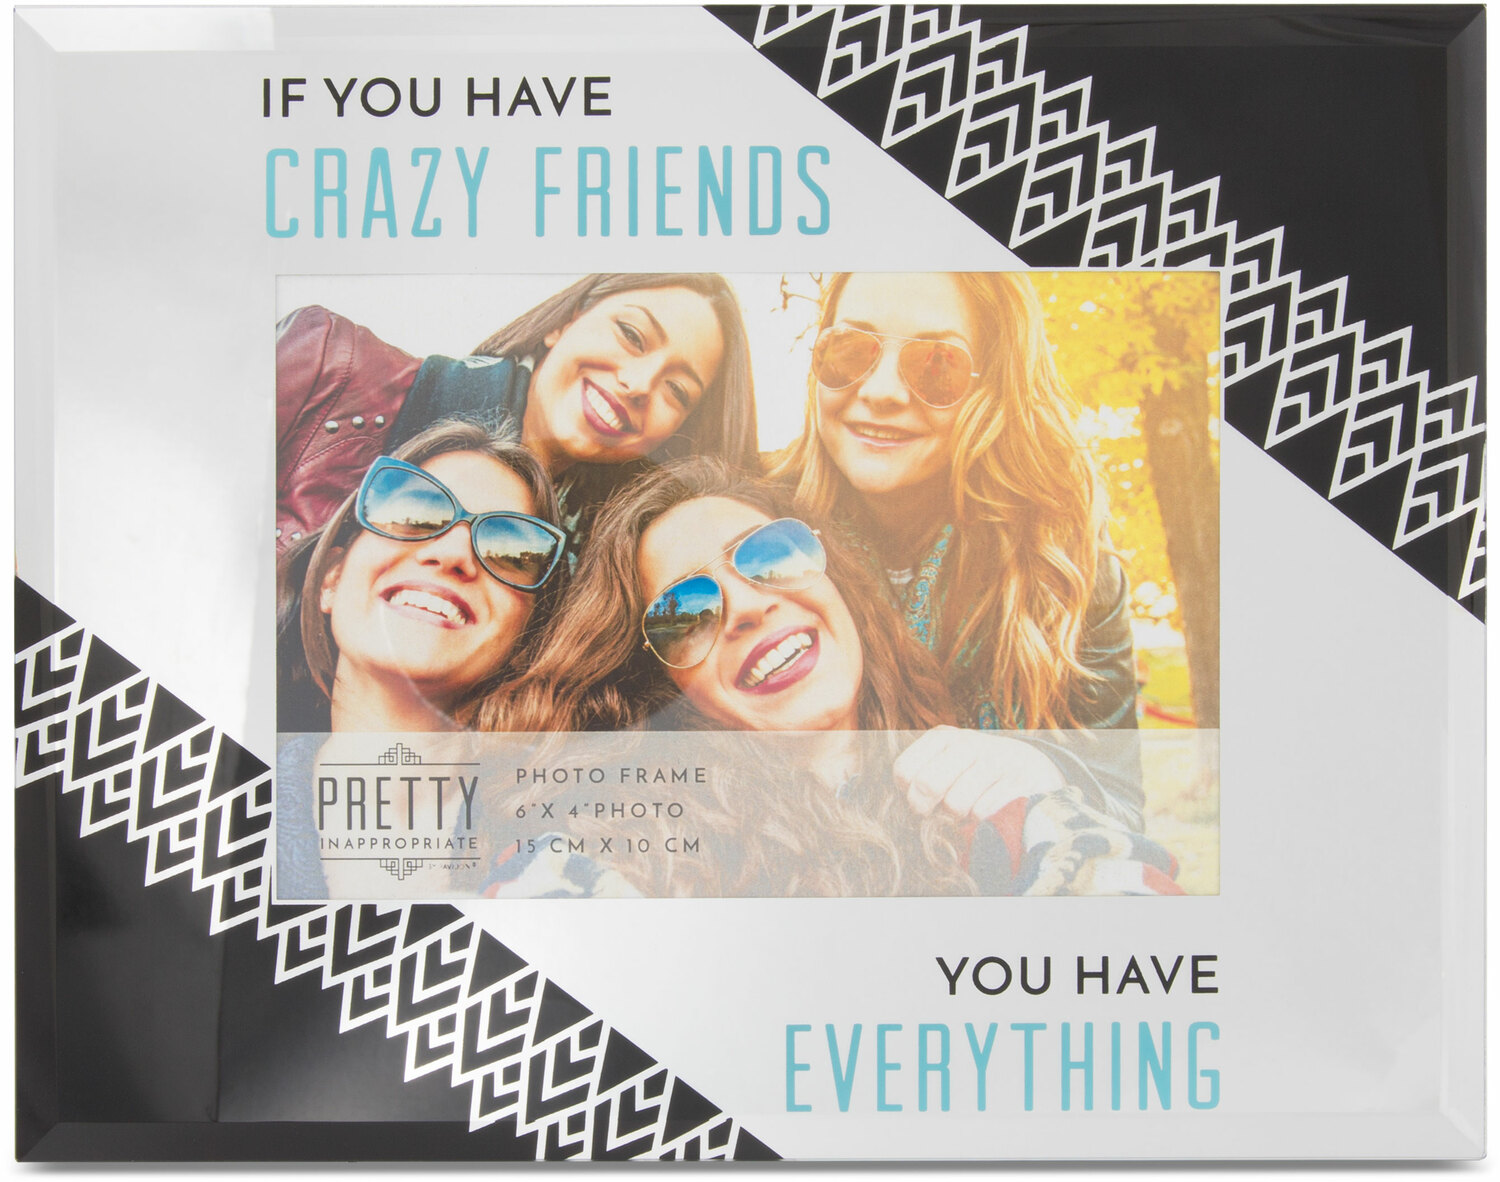 Crazy Friends by Pretty Inappropriate - Crazy Friends - 9" x 7" Mirror Frame (Holds 6" x 4" Photo)